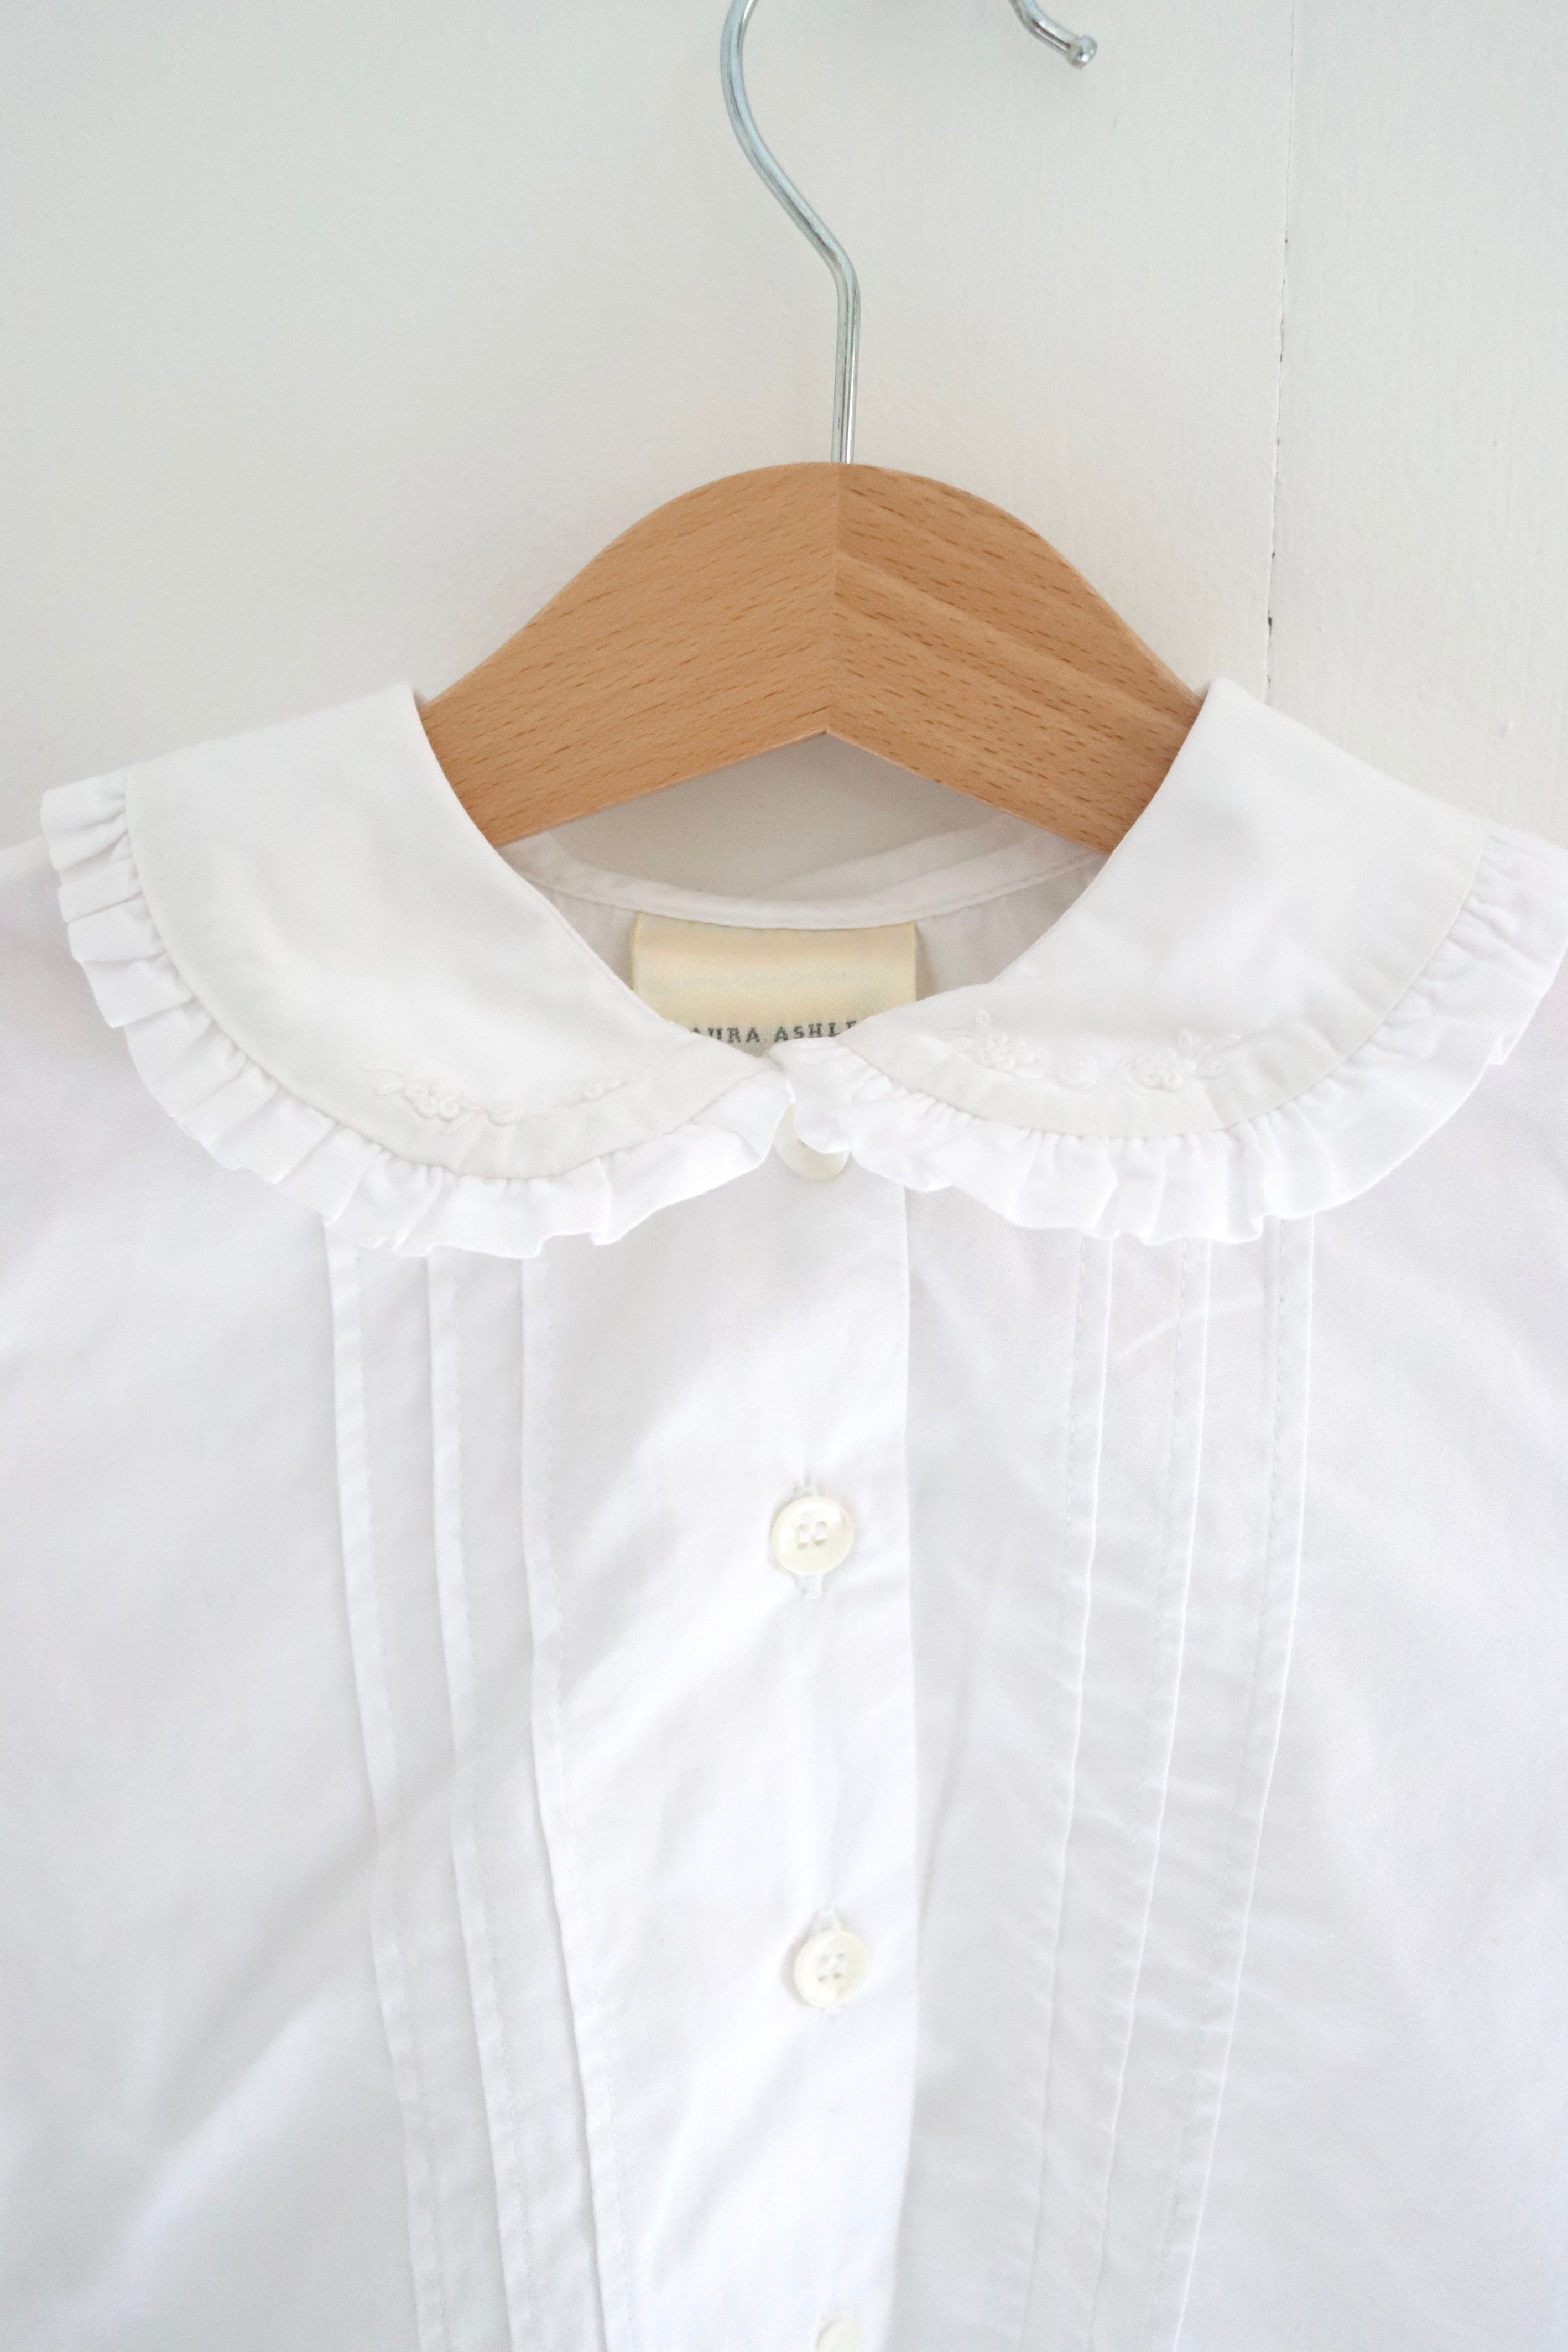 Vintage Laura Ashley button-up short sleeve  - Size 2-4 years - made in Great Britain